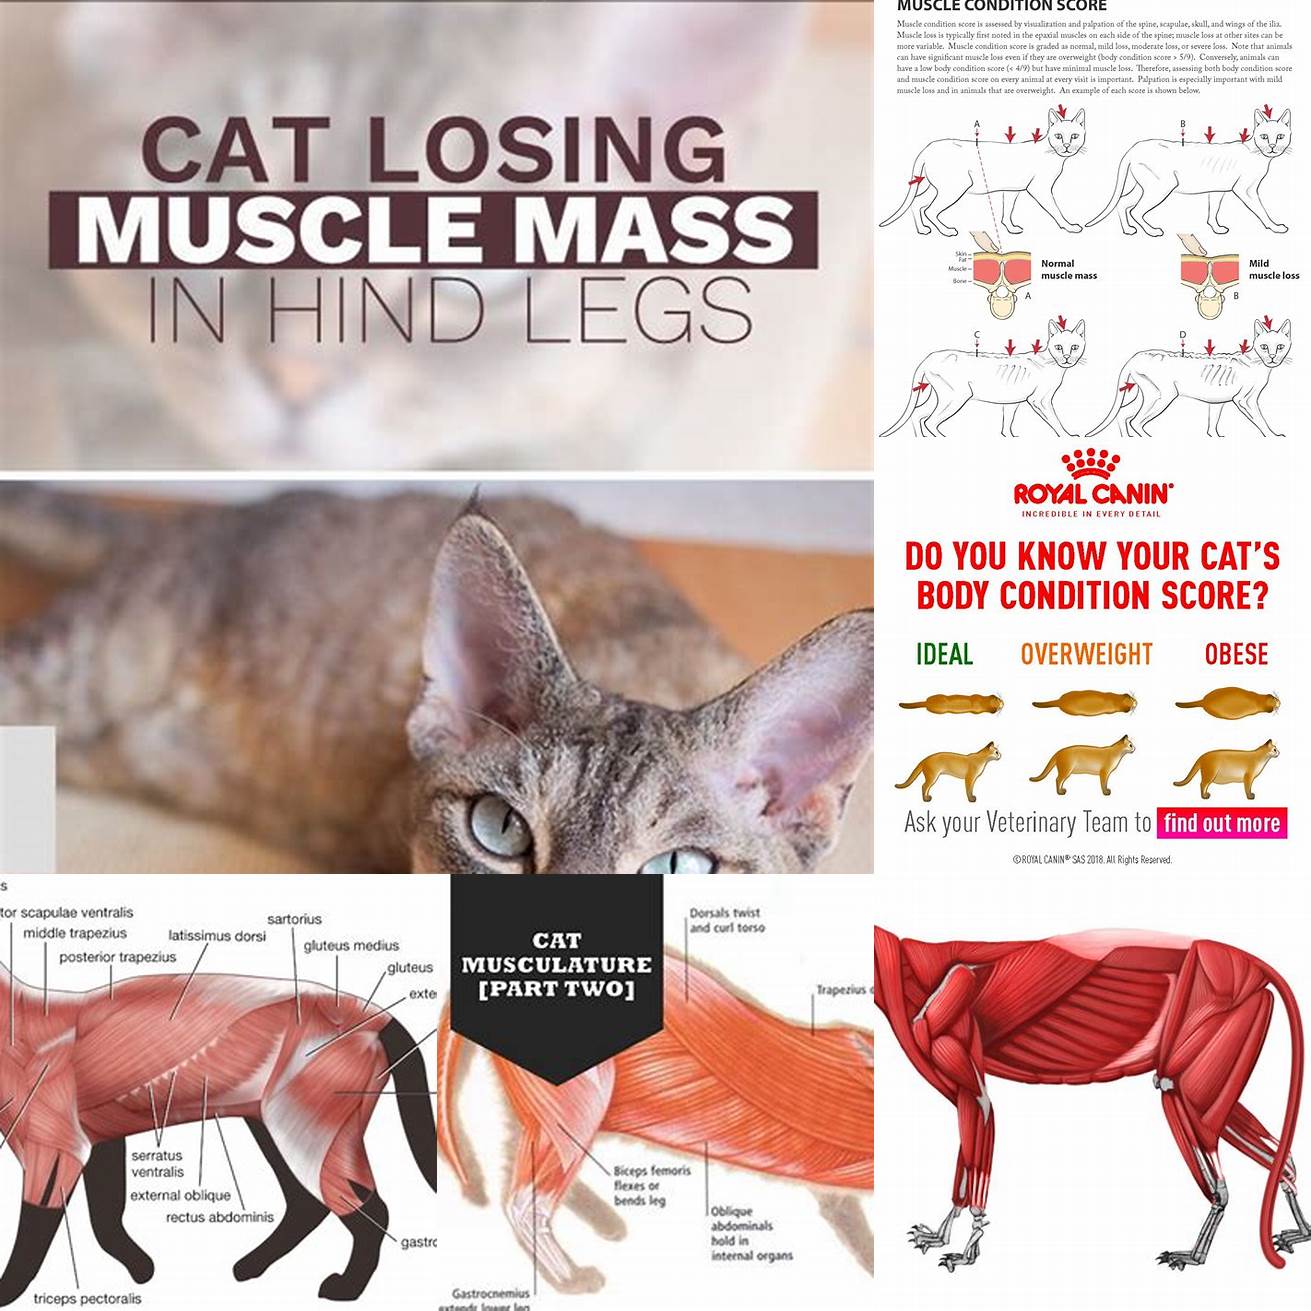 Loss of muscle tone